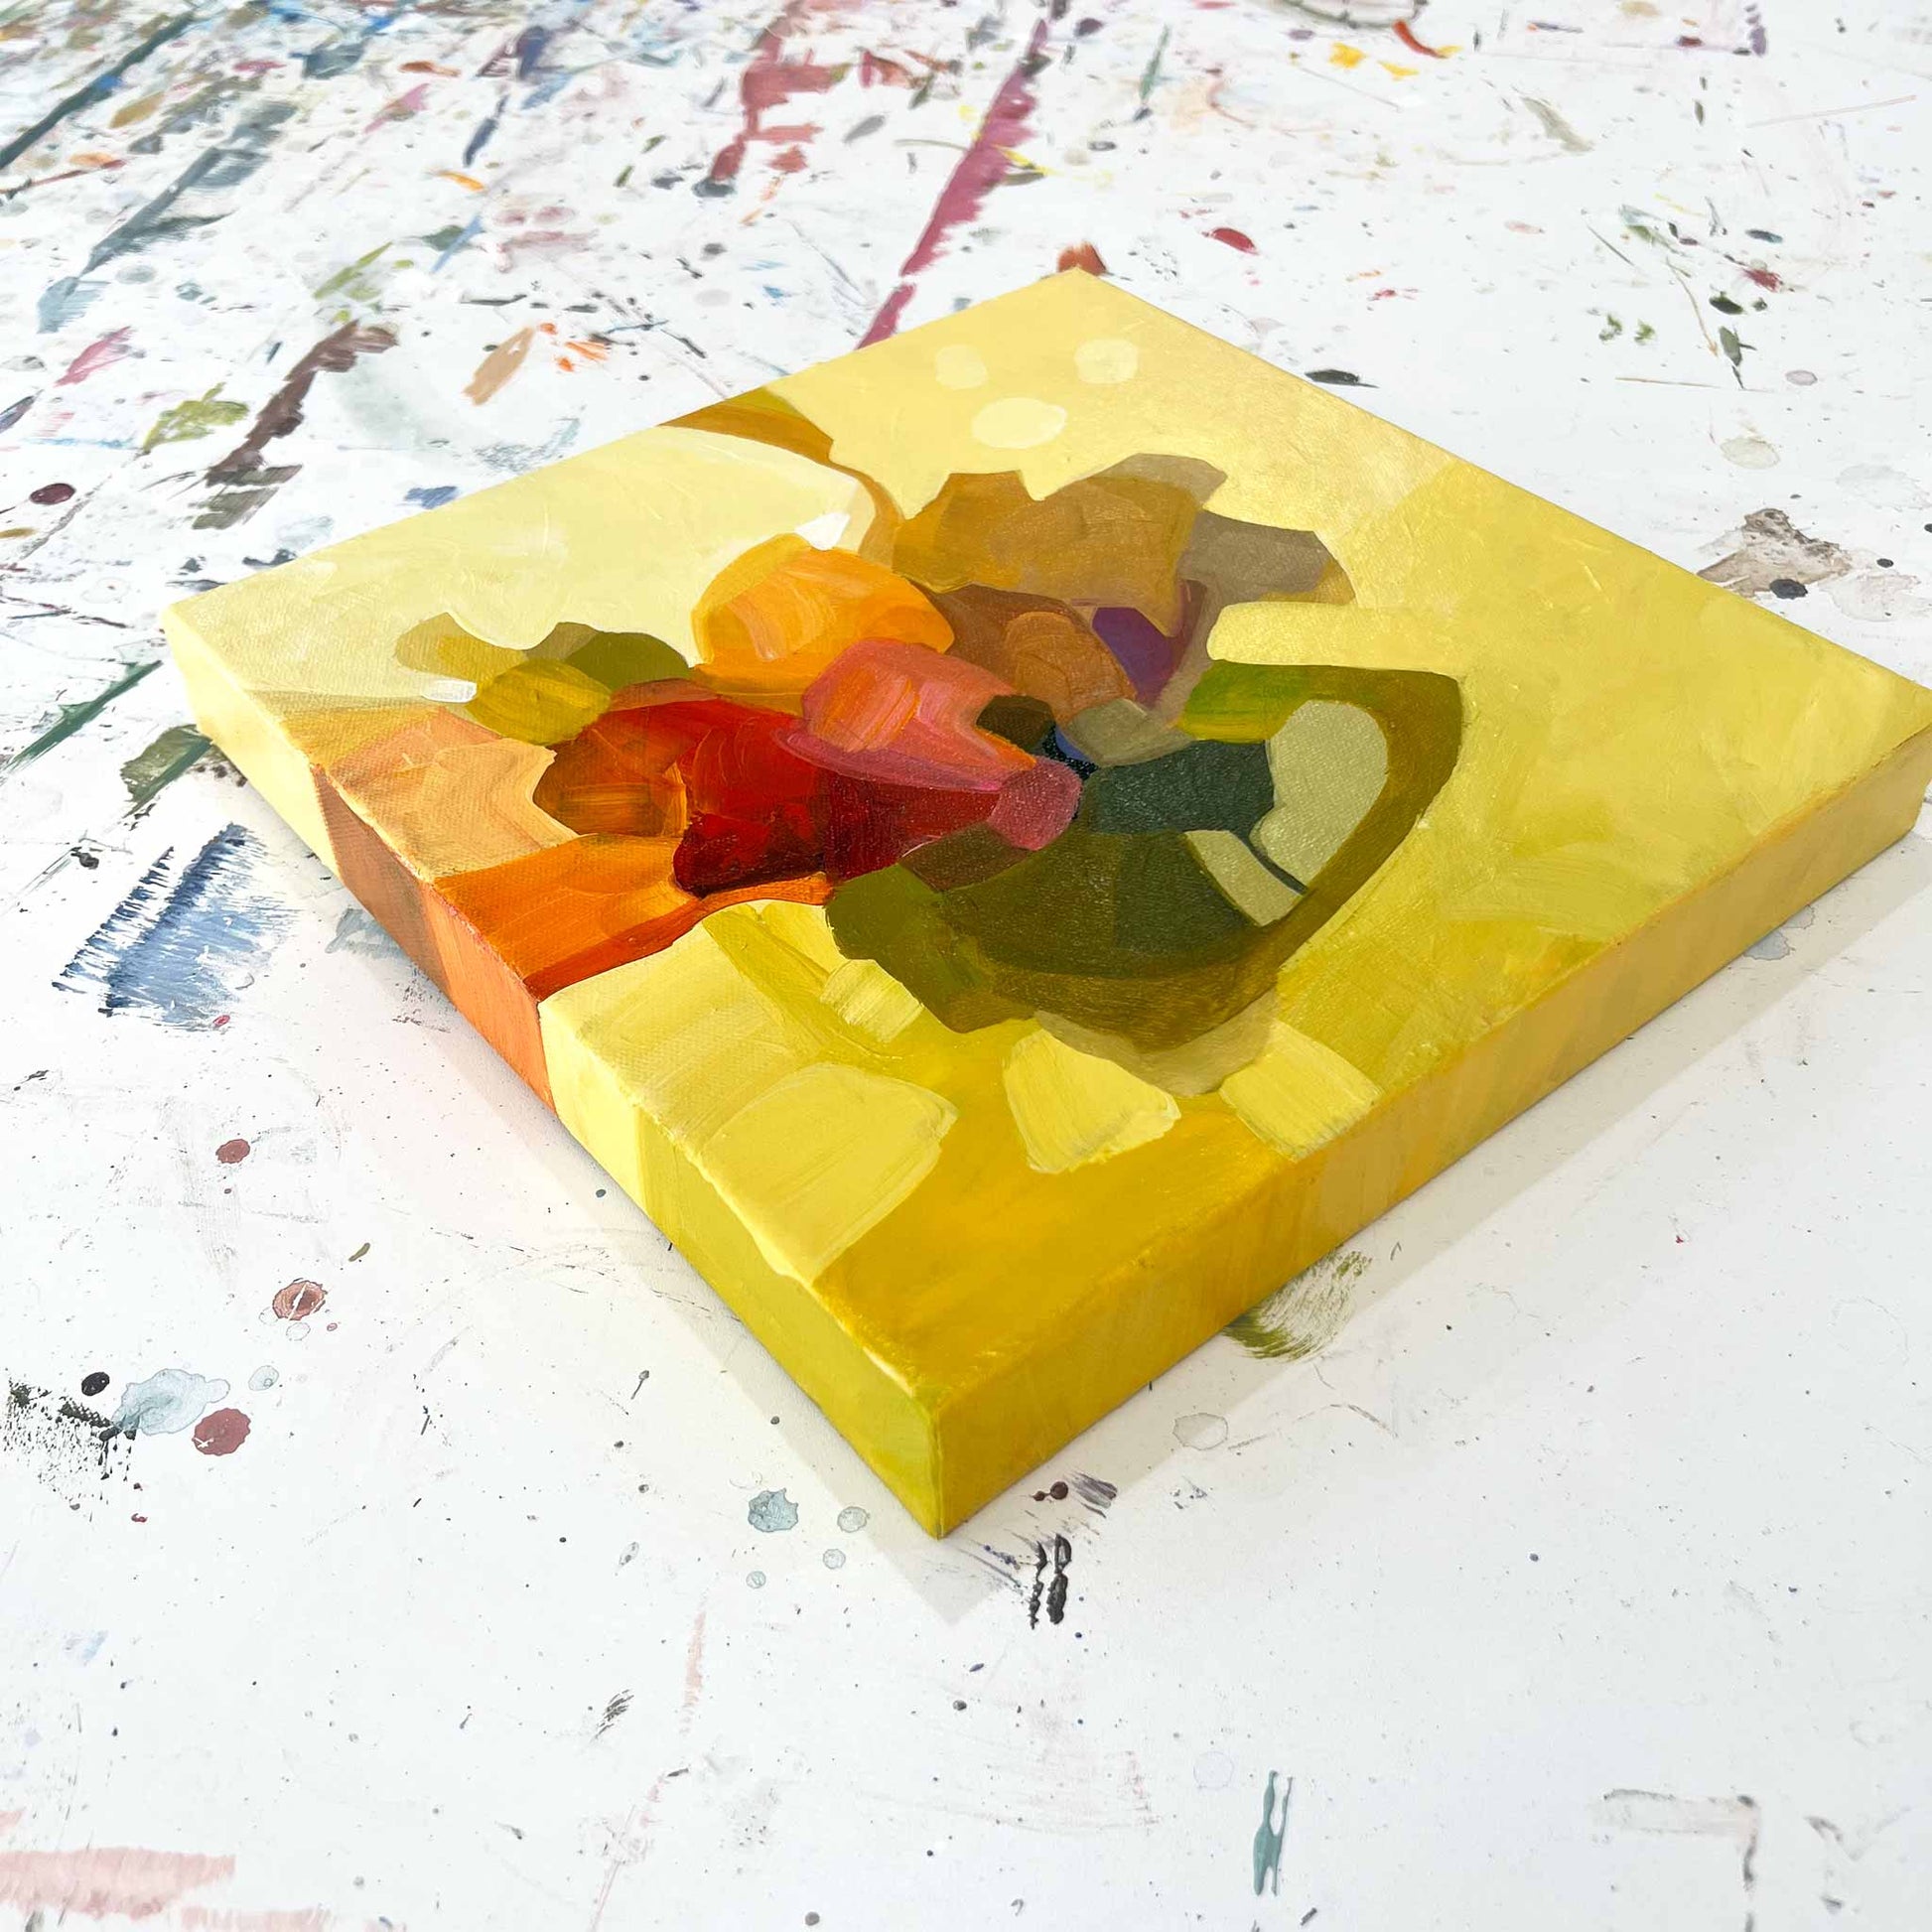 Side view of yellow abstract flower from Canadian abstract artist Susannah Bleasby’s small abstract painting series